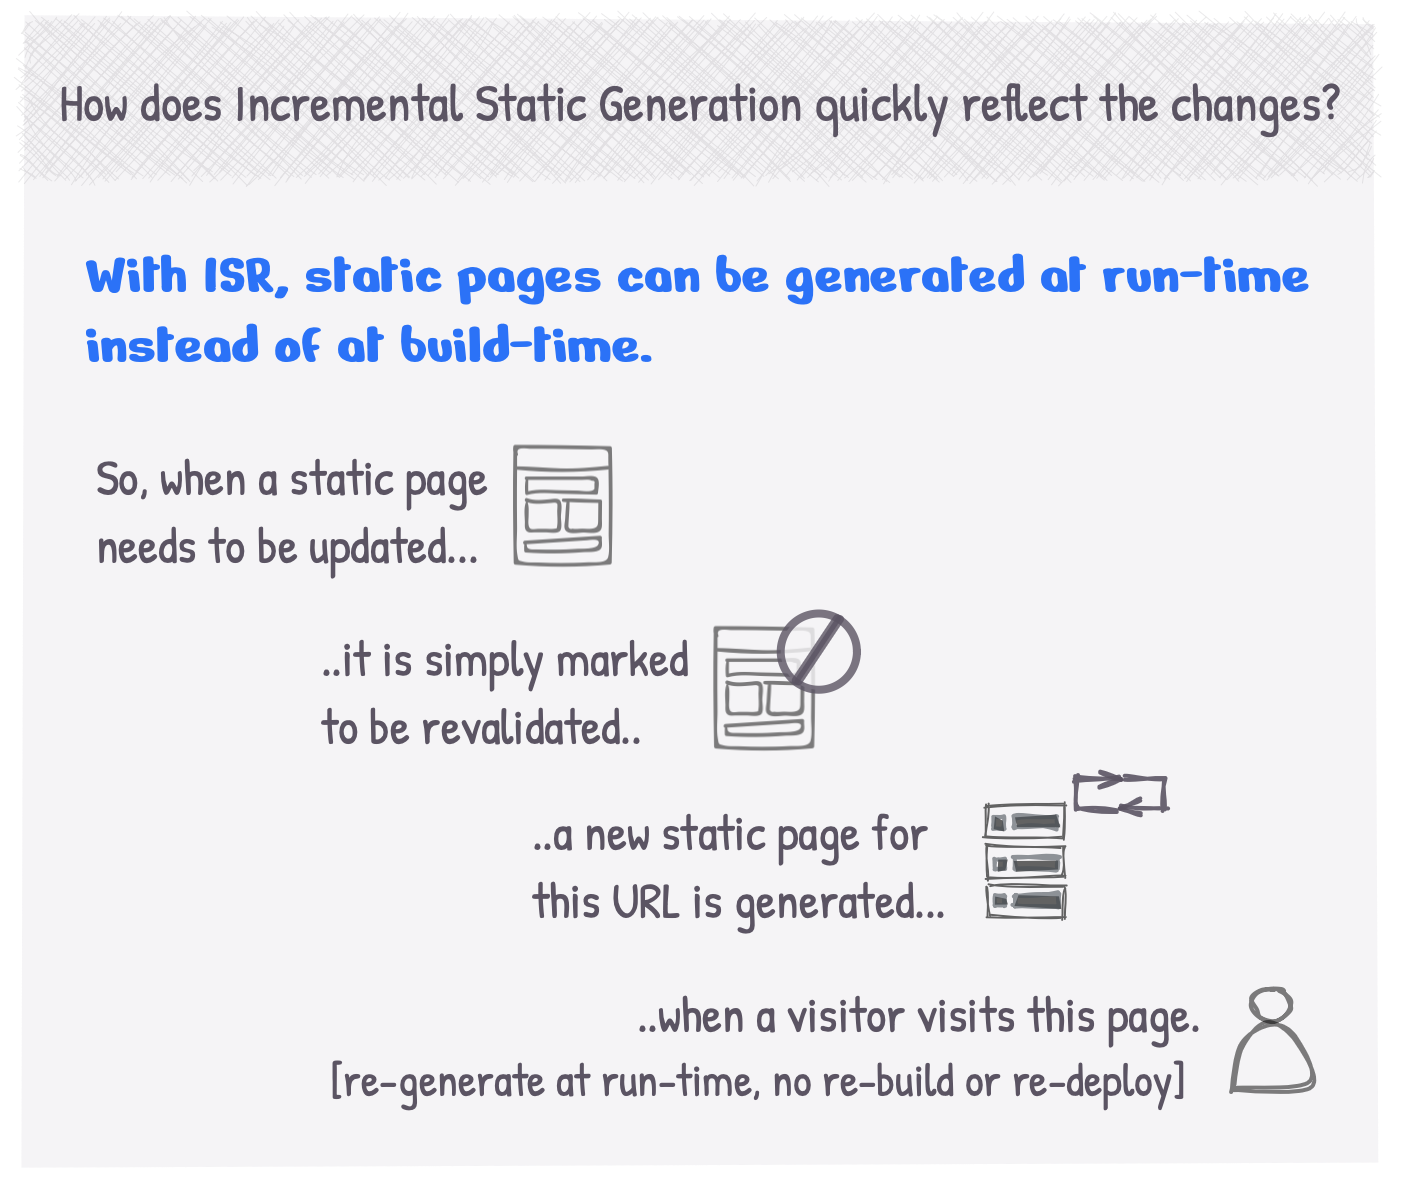 How does Incremental Static Re-generation quickly reflect the changes?